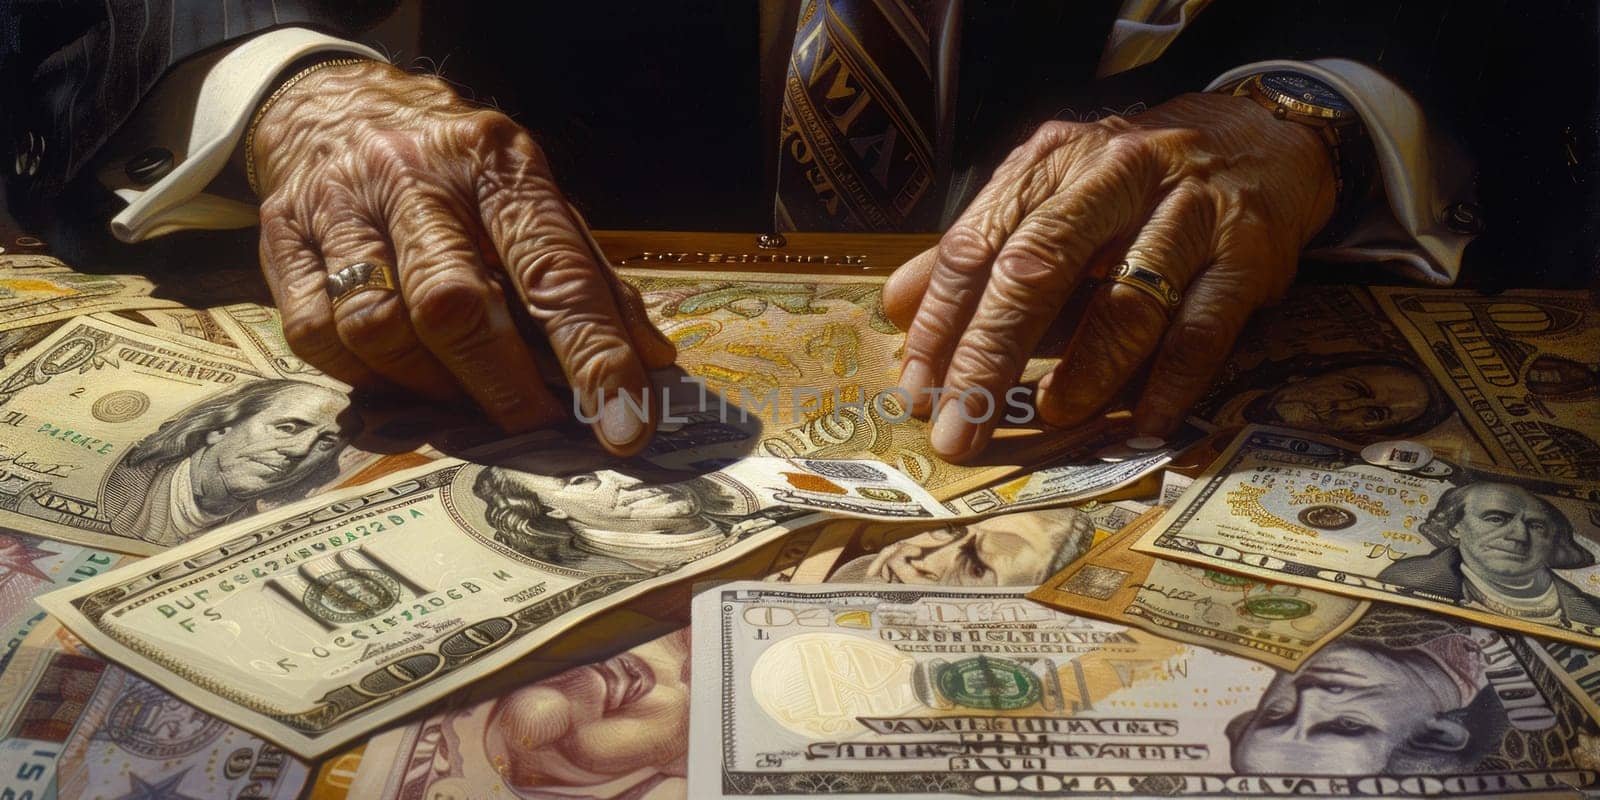 A person joyfully embraces a pile of money with their hands, showcasing financial success and abundance by but_photo